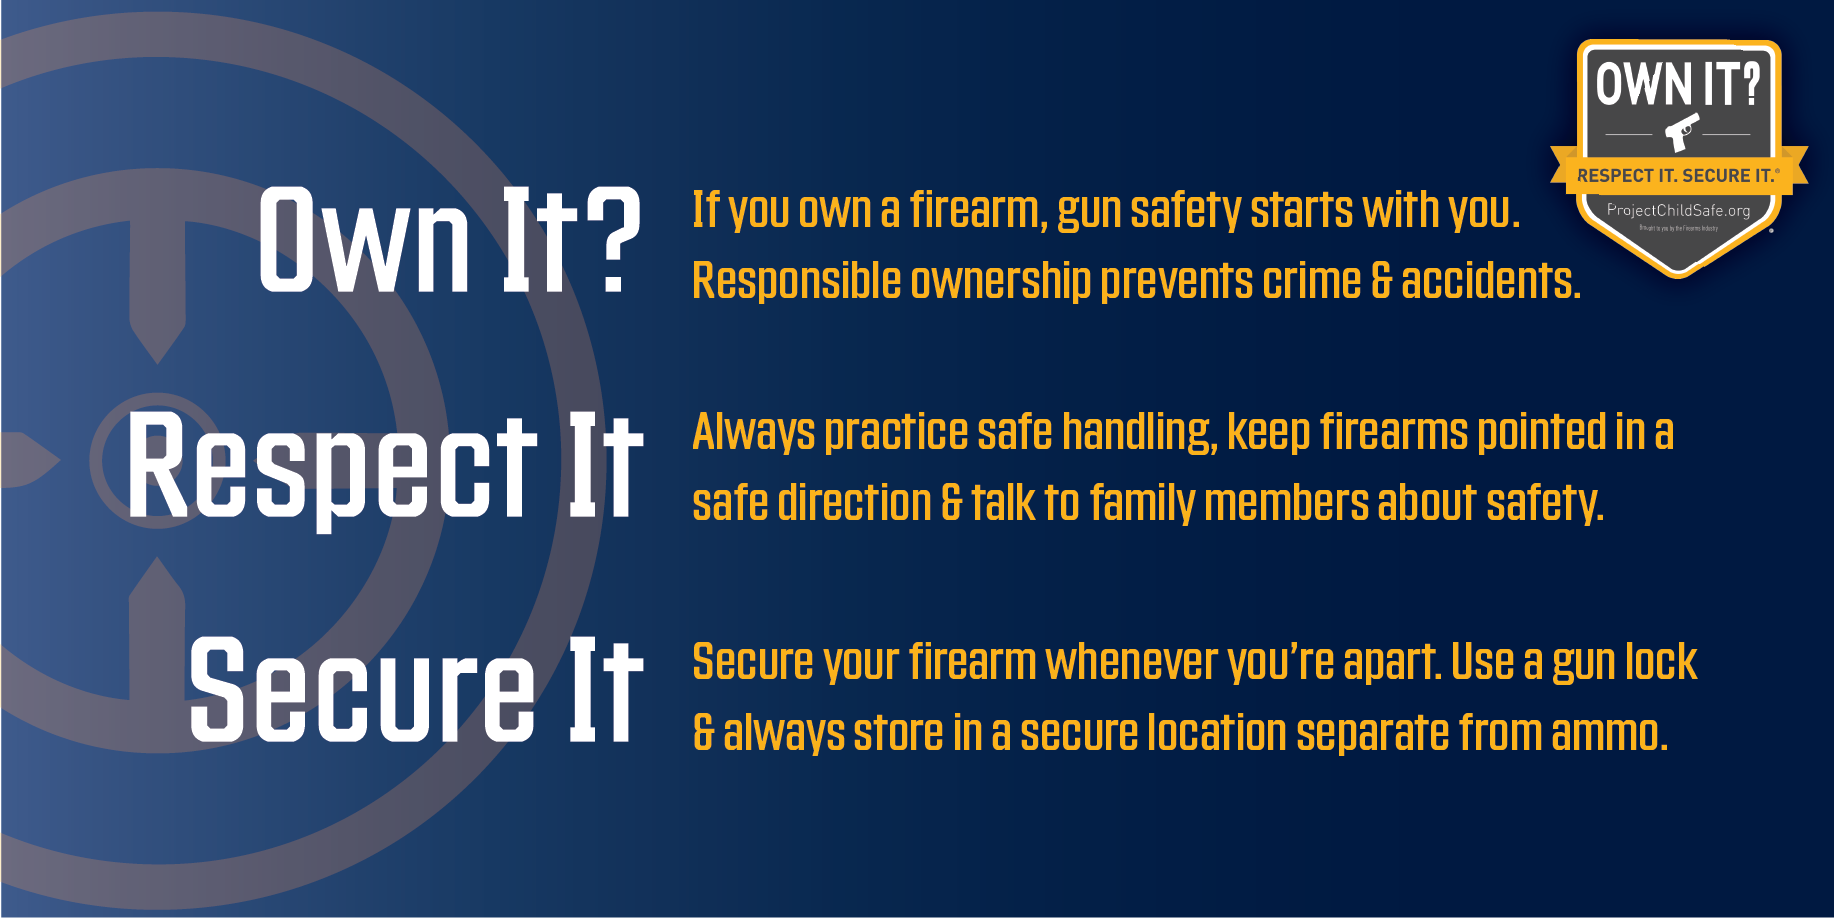 Own it, respect it, secure it prompt for gun safety and keeping kids safe.